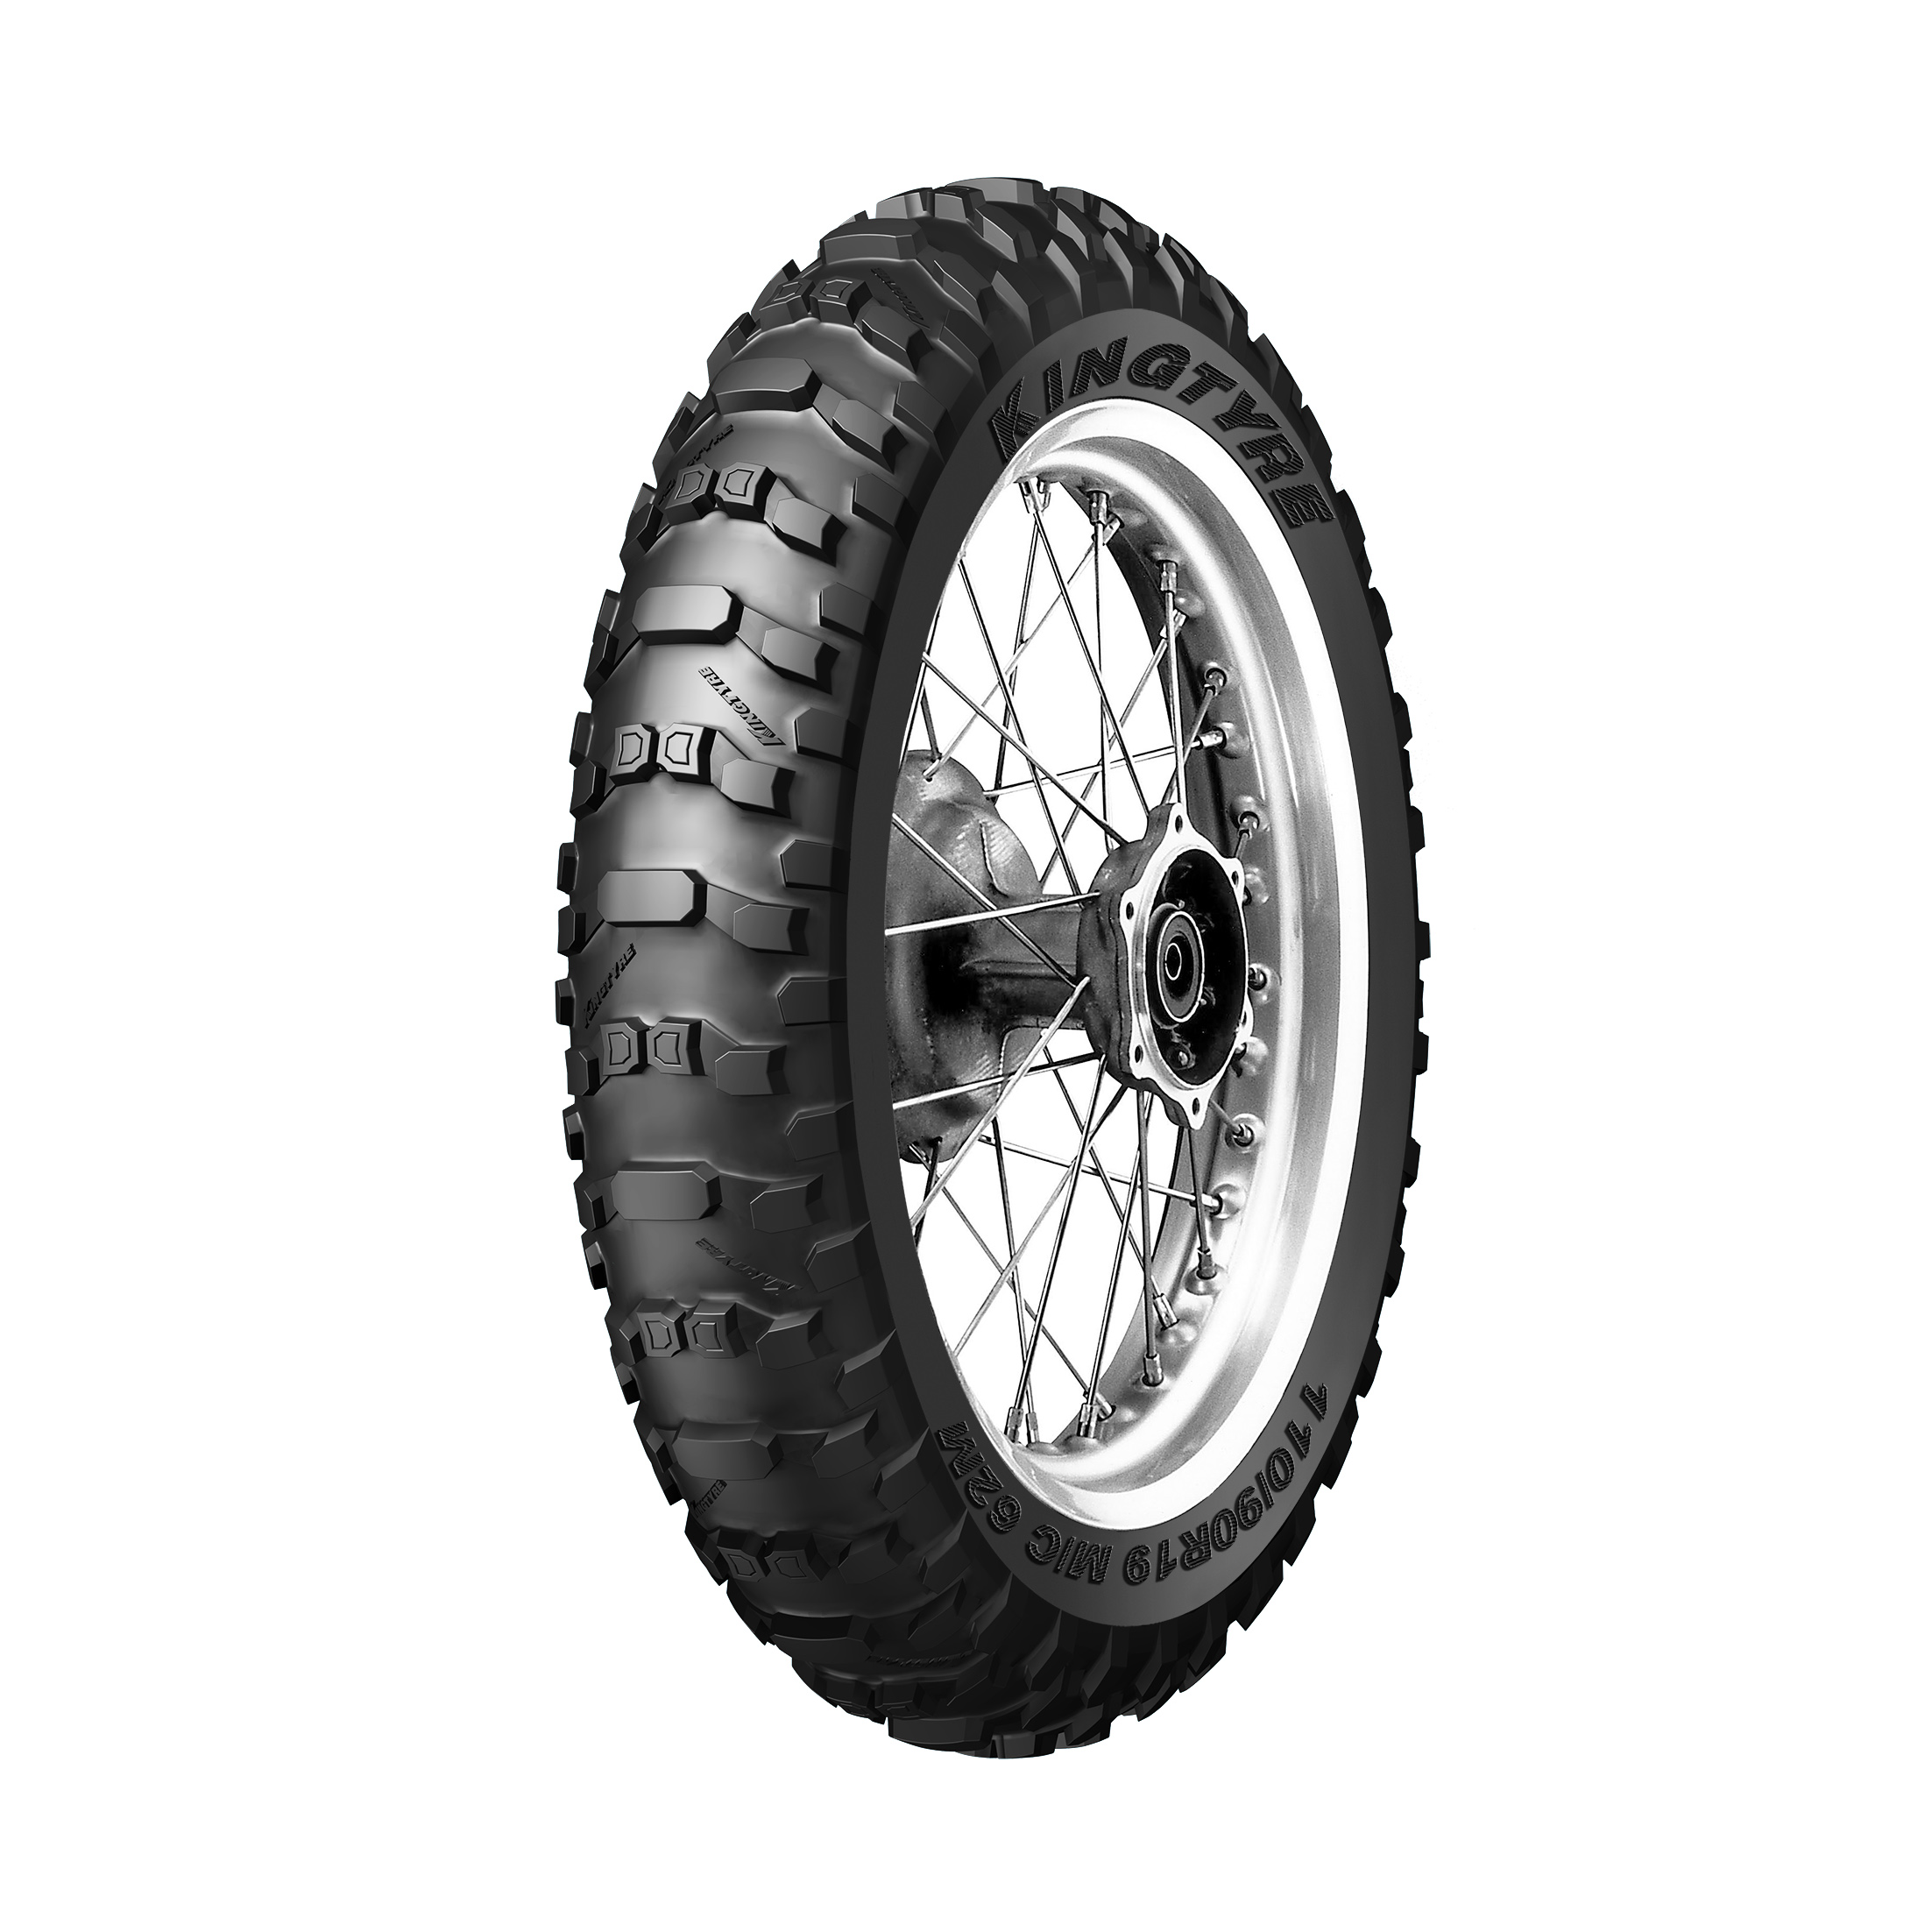 Good quality White Sidewall Fat Bike Tyre -
 MOTOCROSS OFF ROAD TIRE K83 – Willing